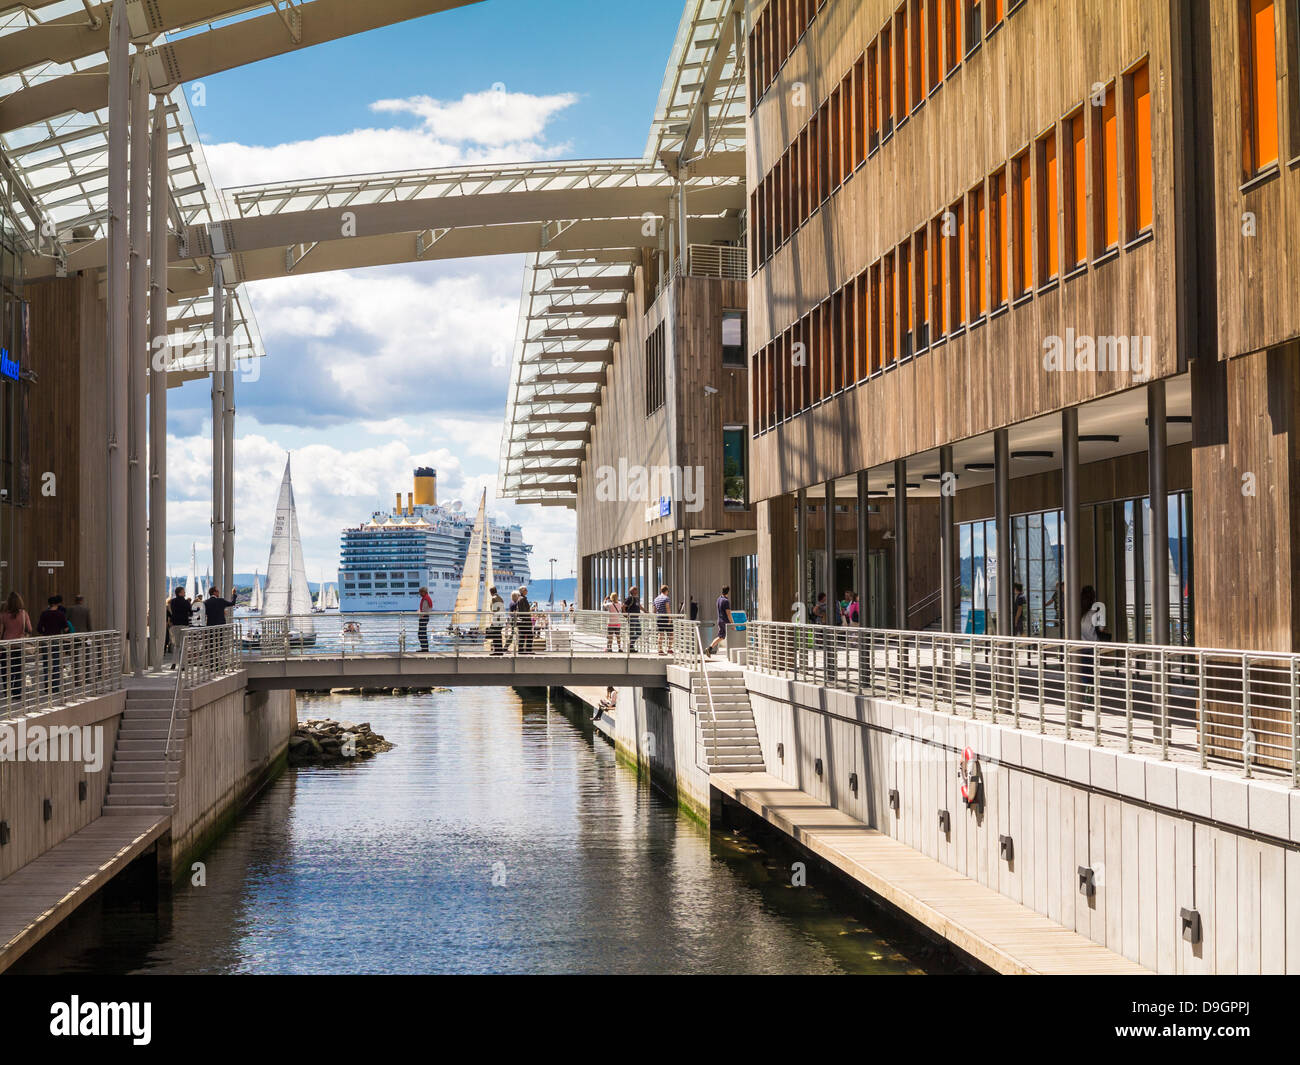 Oslo, Norway - Harbor and cruise ship with Astrup Fearnley Museet Museum of Modern Art (R) Stock Photo